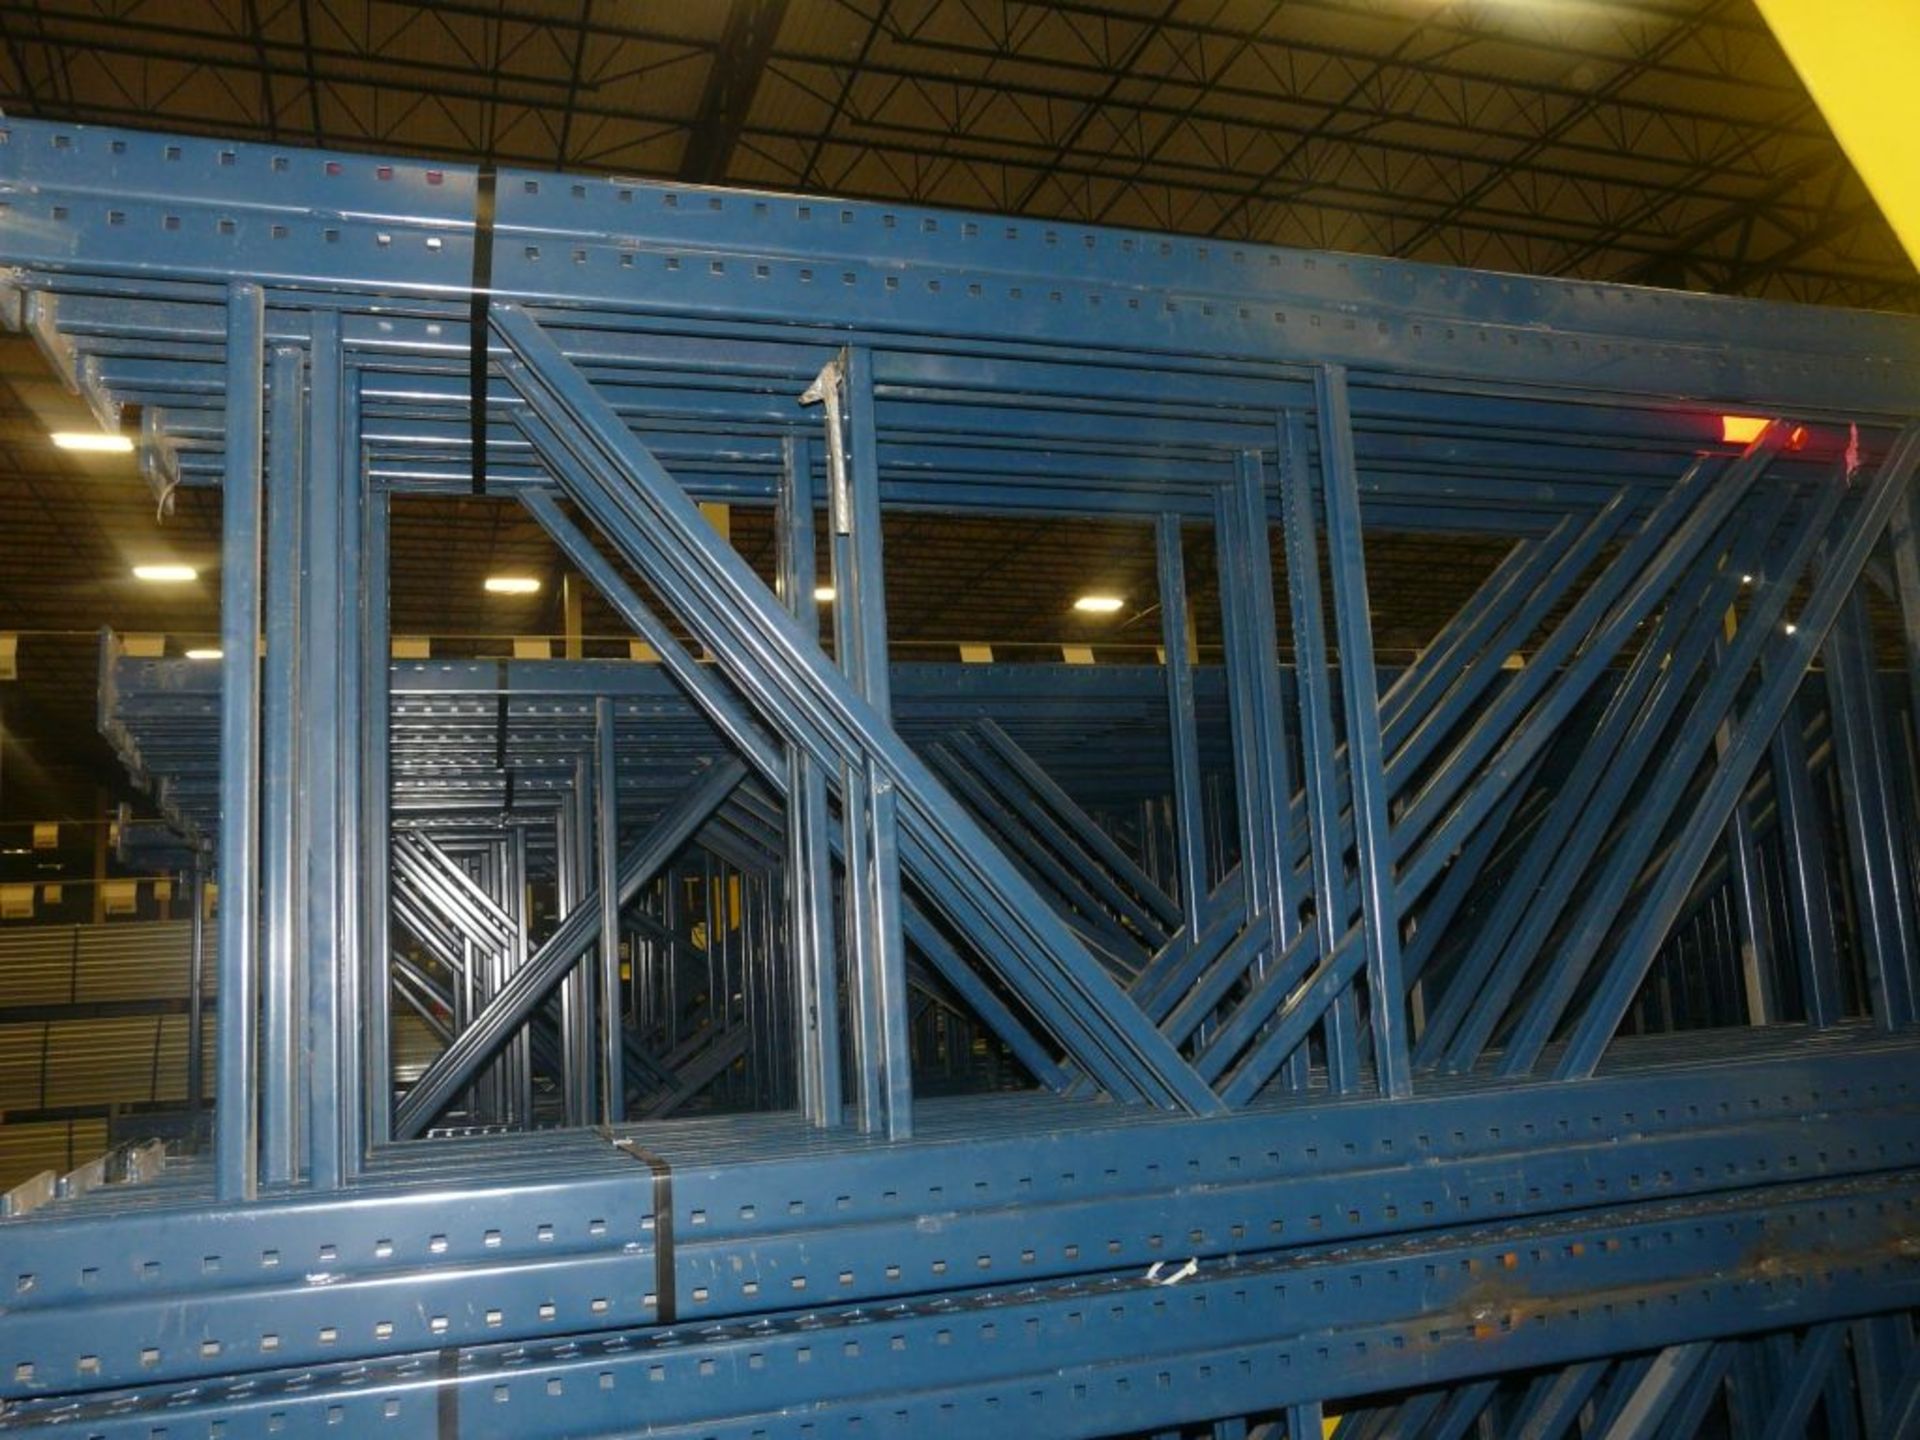 Lot of (10) 29'H x 42"W Double Column Uprights with 11' Second Column - Tag: 224096 - $30 Lot - Image 3 of 3